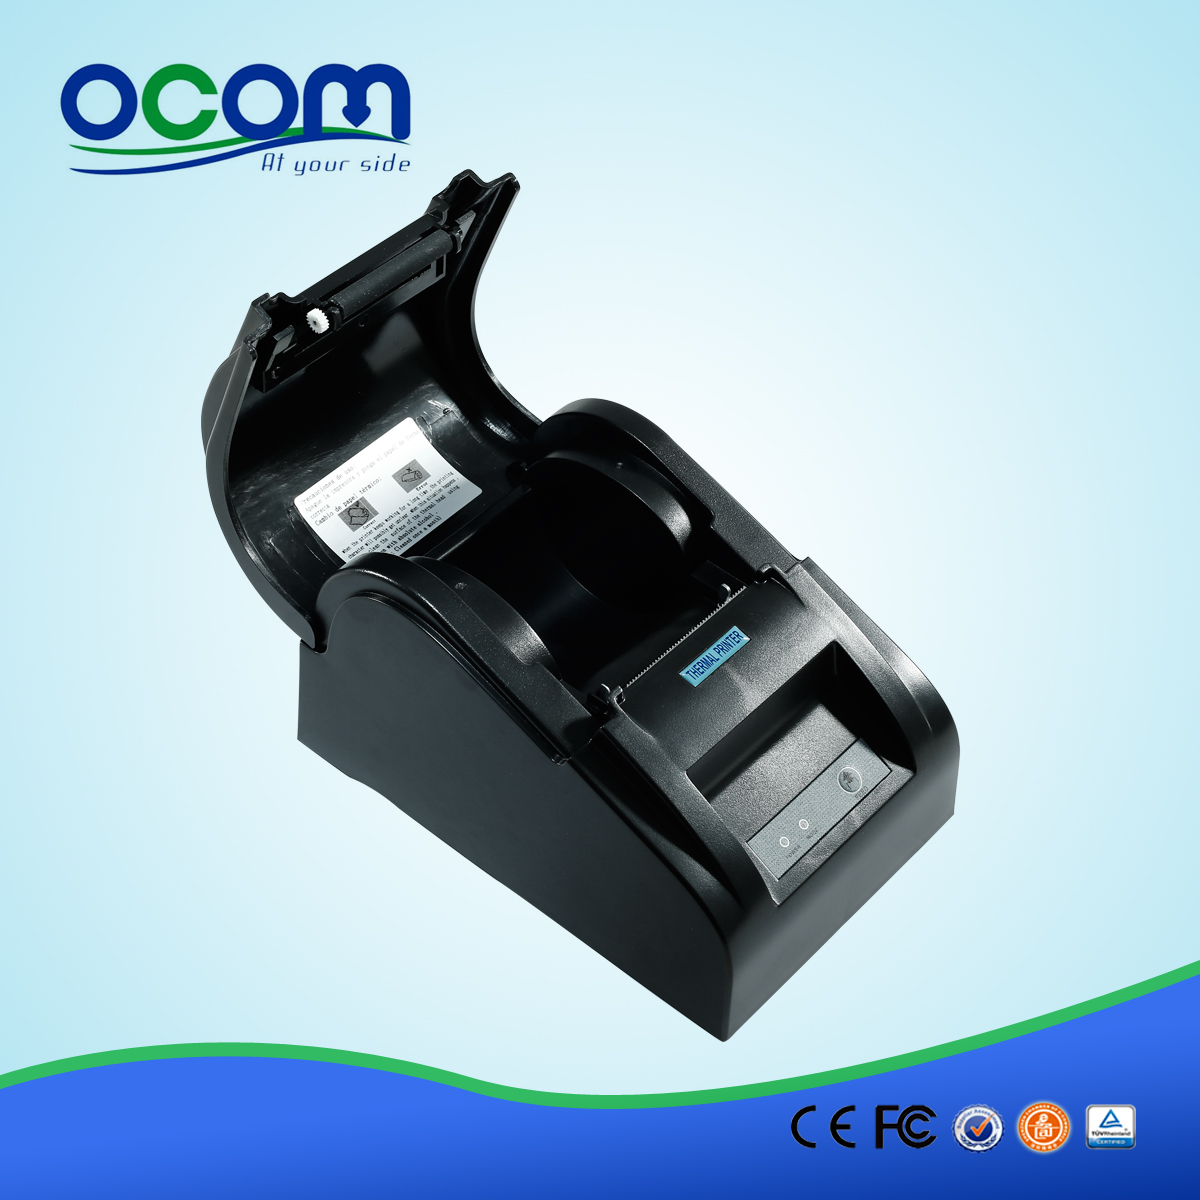 58mm thermal receipt printer with linux driver OCPP-585